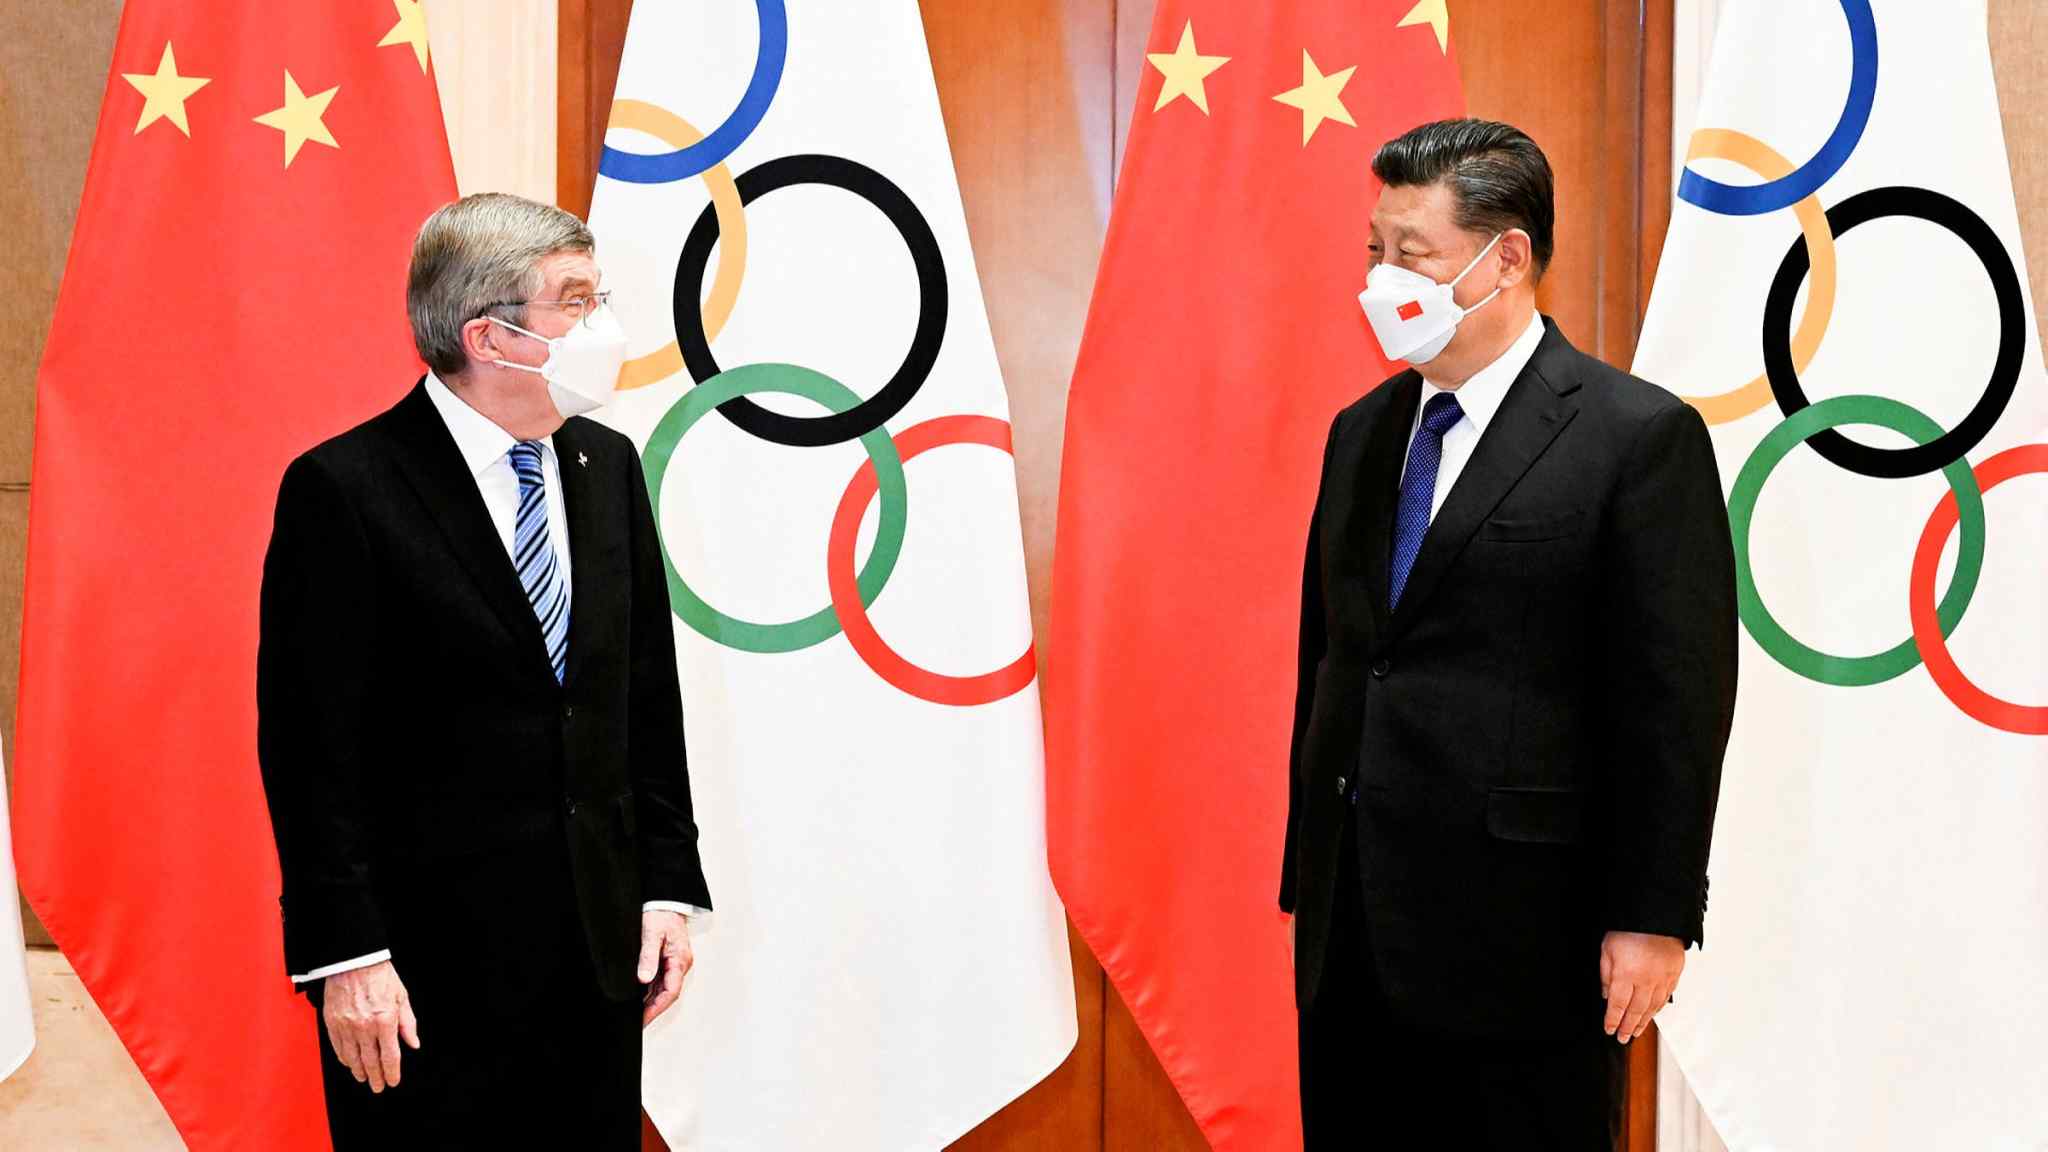 Xi meets Olympics chief to discuss Covid containment ahead of Winter Games